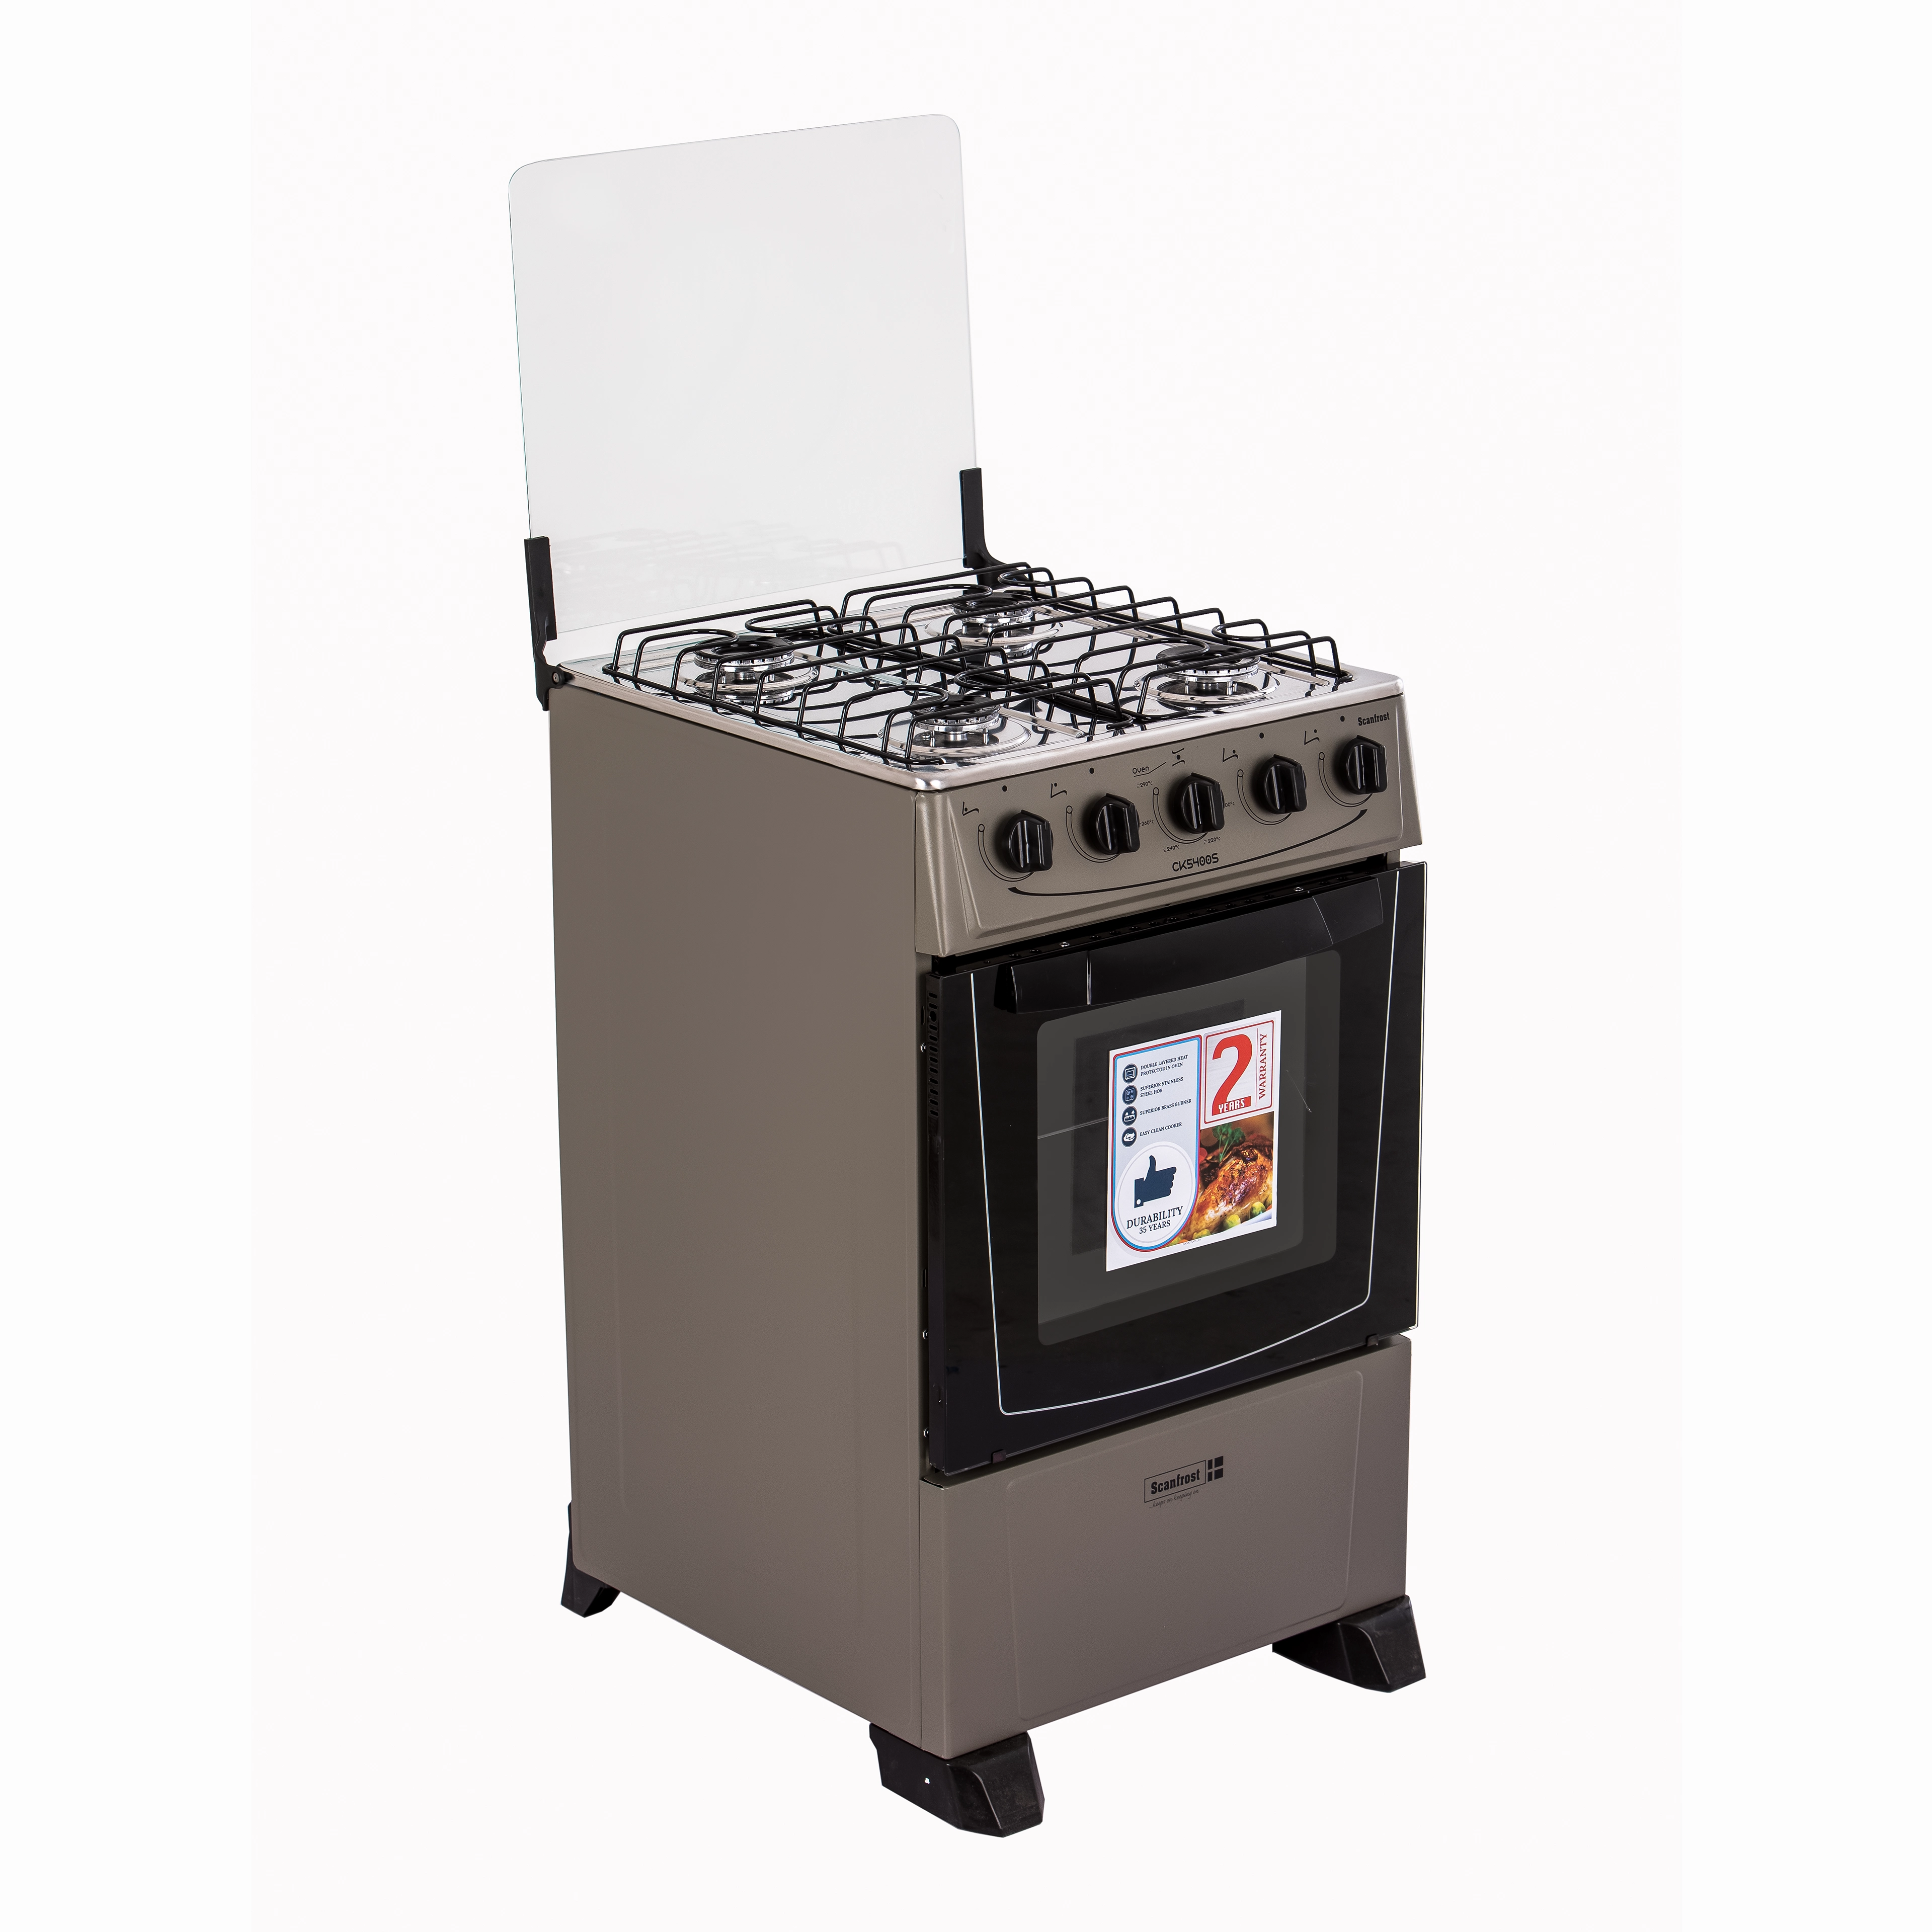 SCANFROST GAS COOKER 4 BURNERS CK5400 GREY 